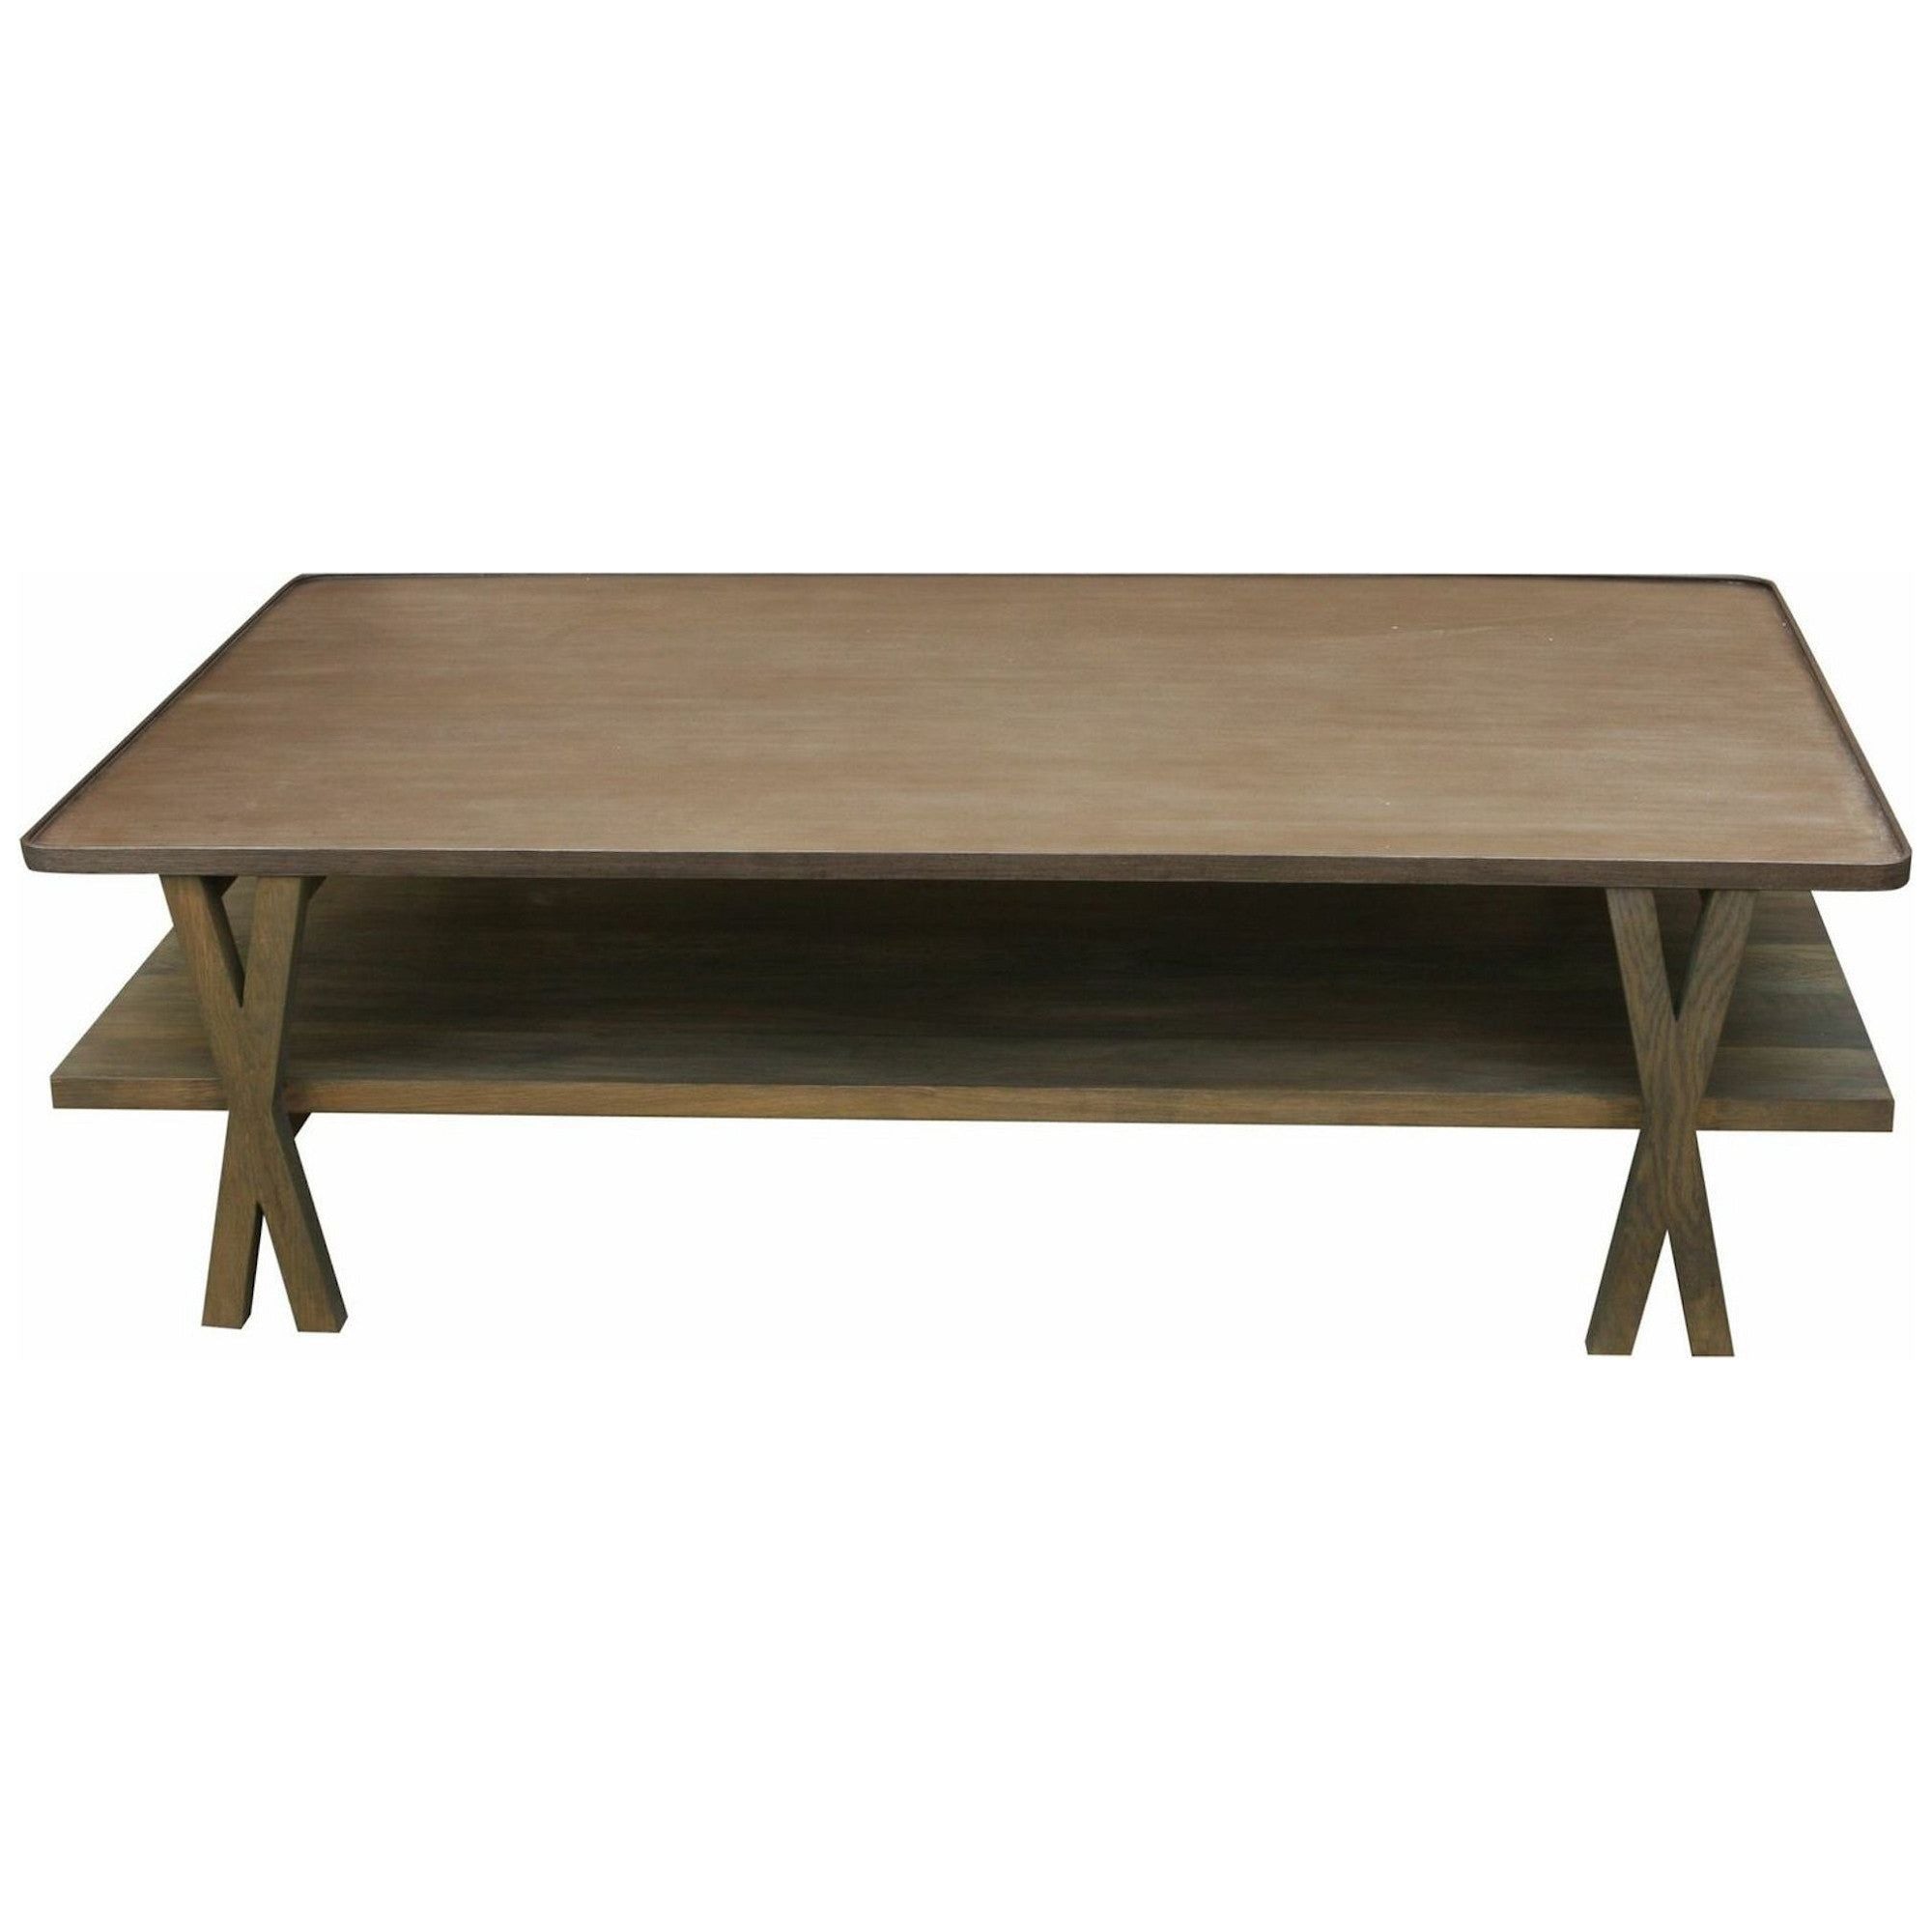 Contemporary Metal and White Oak Coffee Table